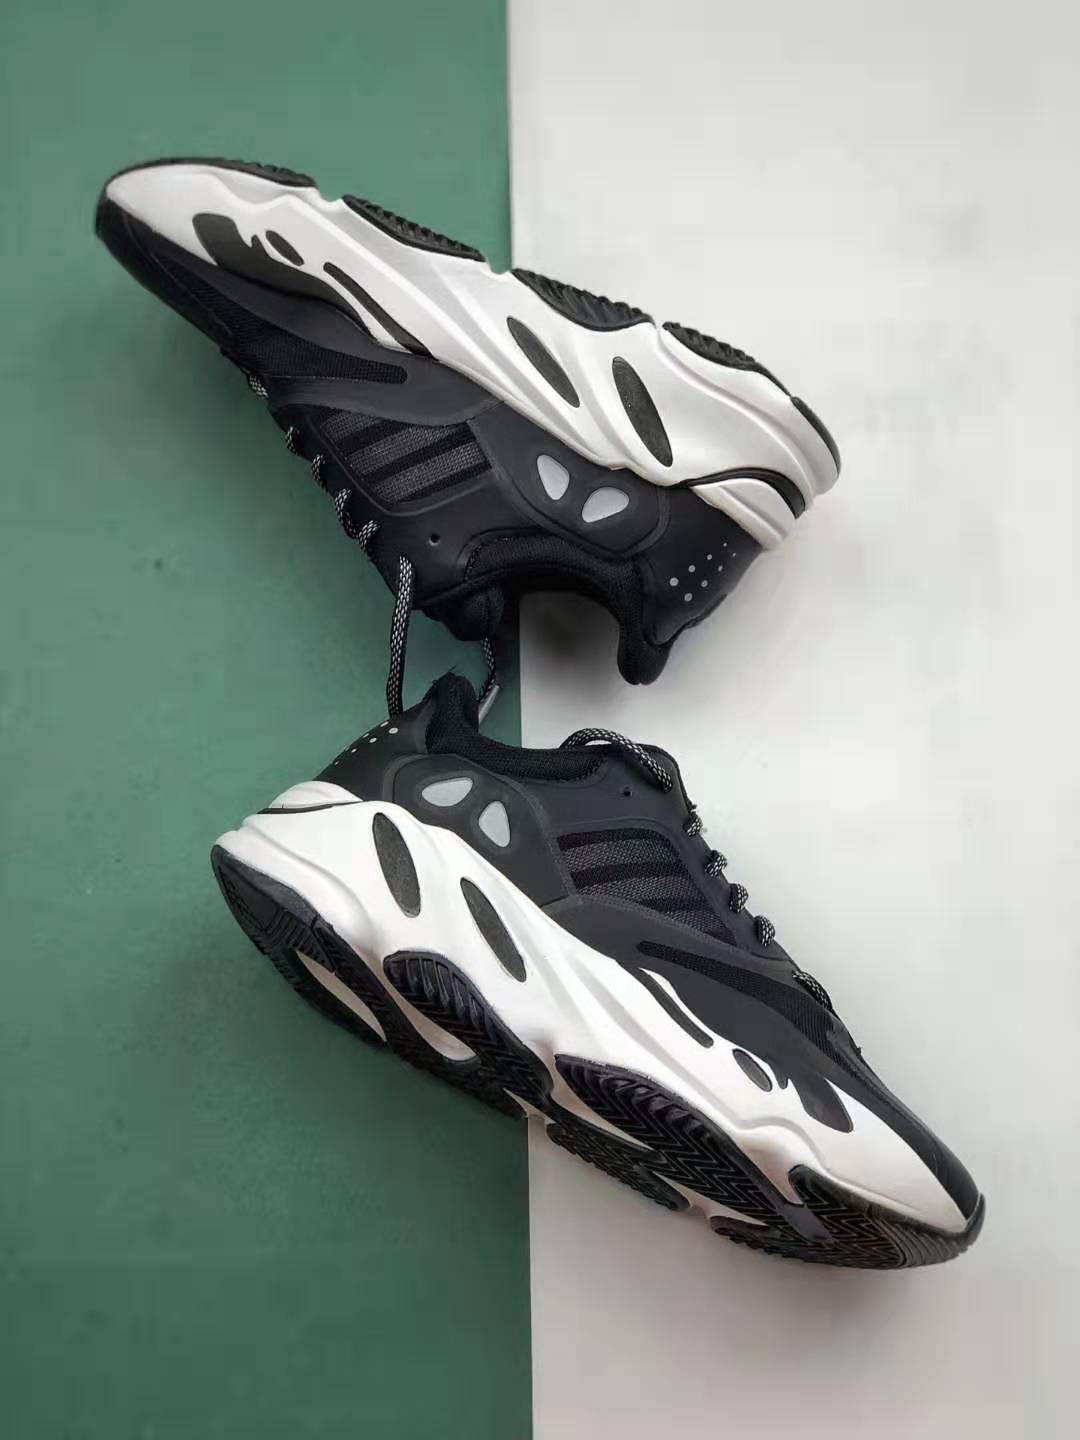 Adidas Yeezy Boost 700 Black White EG6991 - Premium Footwear at Competitive Prices